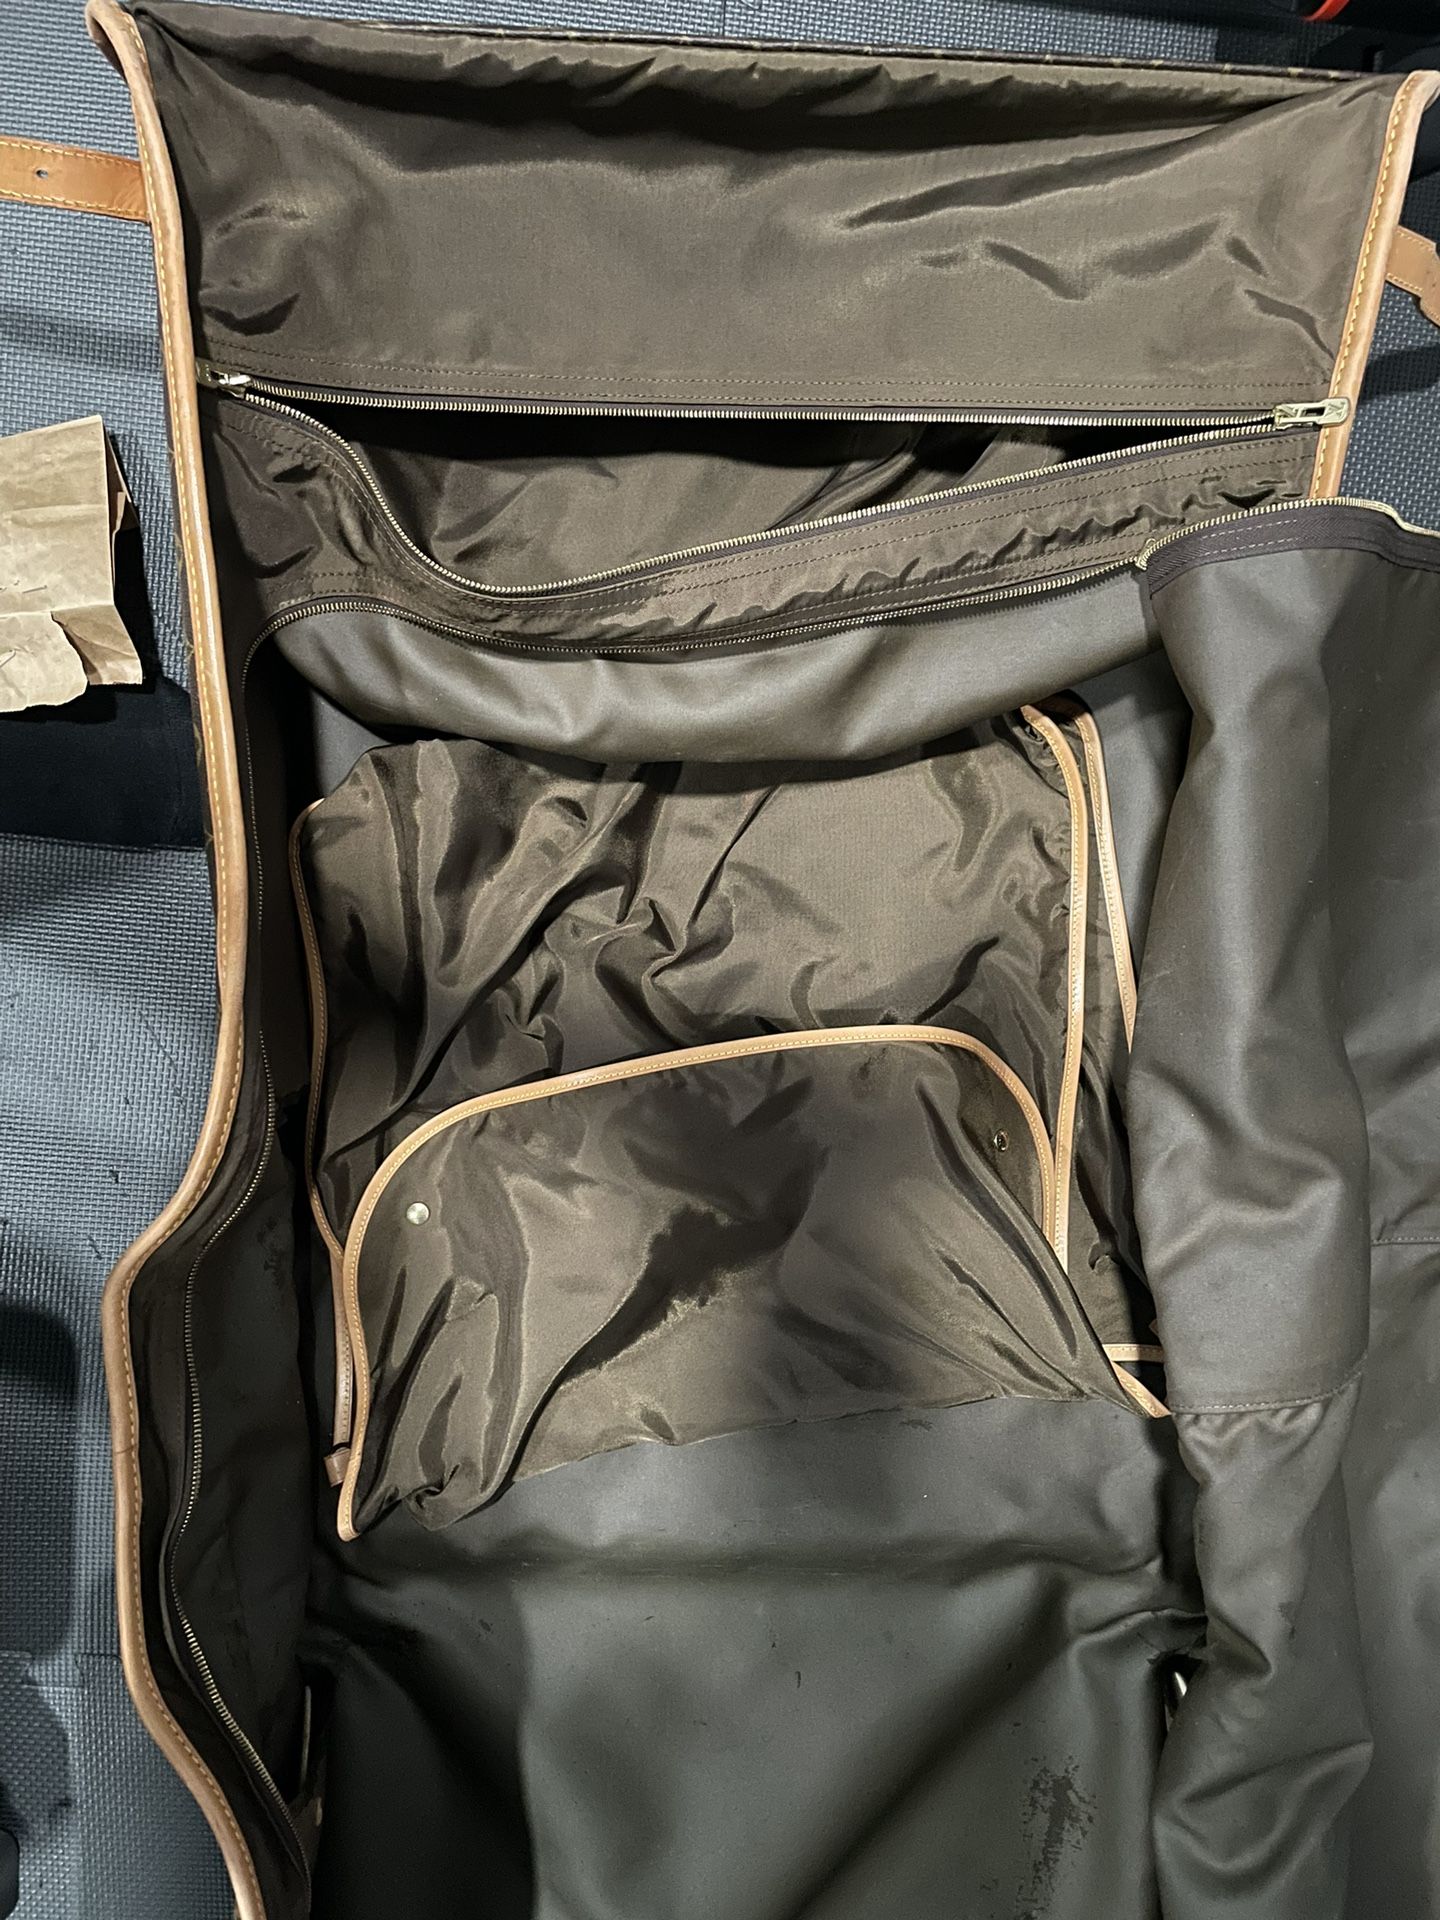 vuitton luggage protector